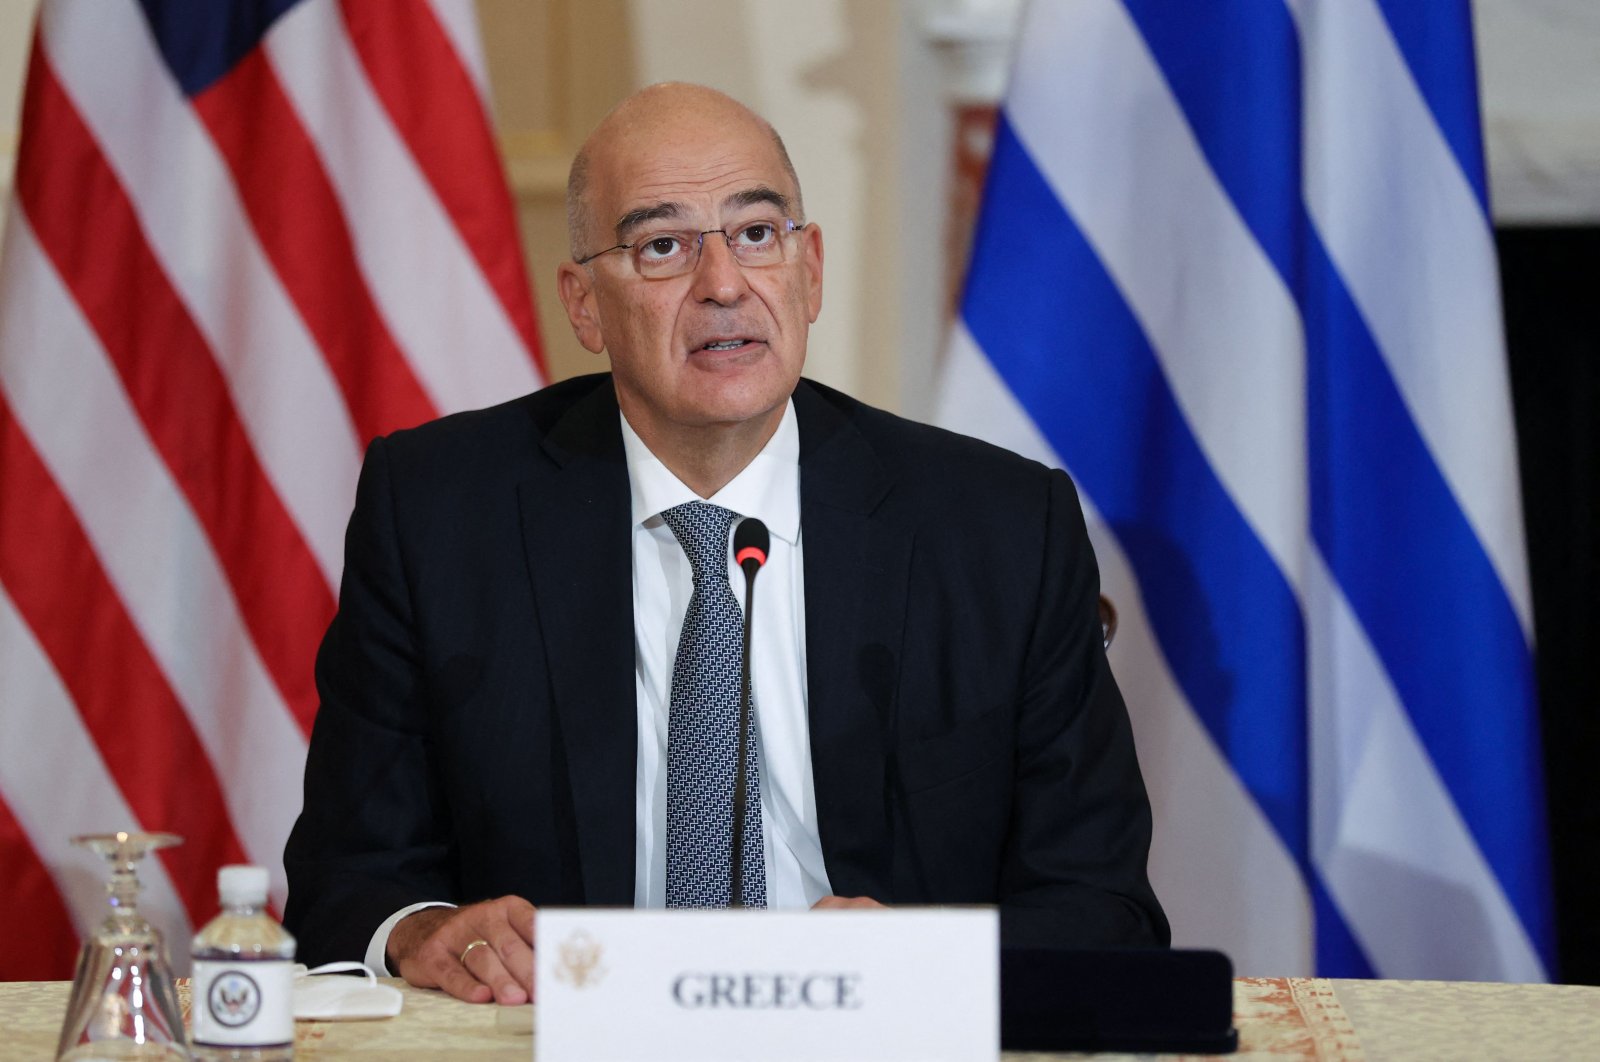 Greek Foreign Minister Nikos Dendias speaks after signing the renewal of the U.S.-Greece Mutual Defense Cooperation Agreement at the State Department in Washington, D.C., U.S., on Oct. 14, 2021. (AFP Photo)